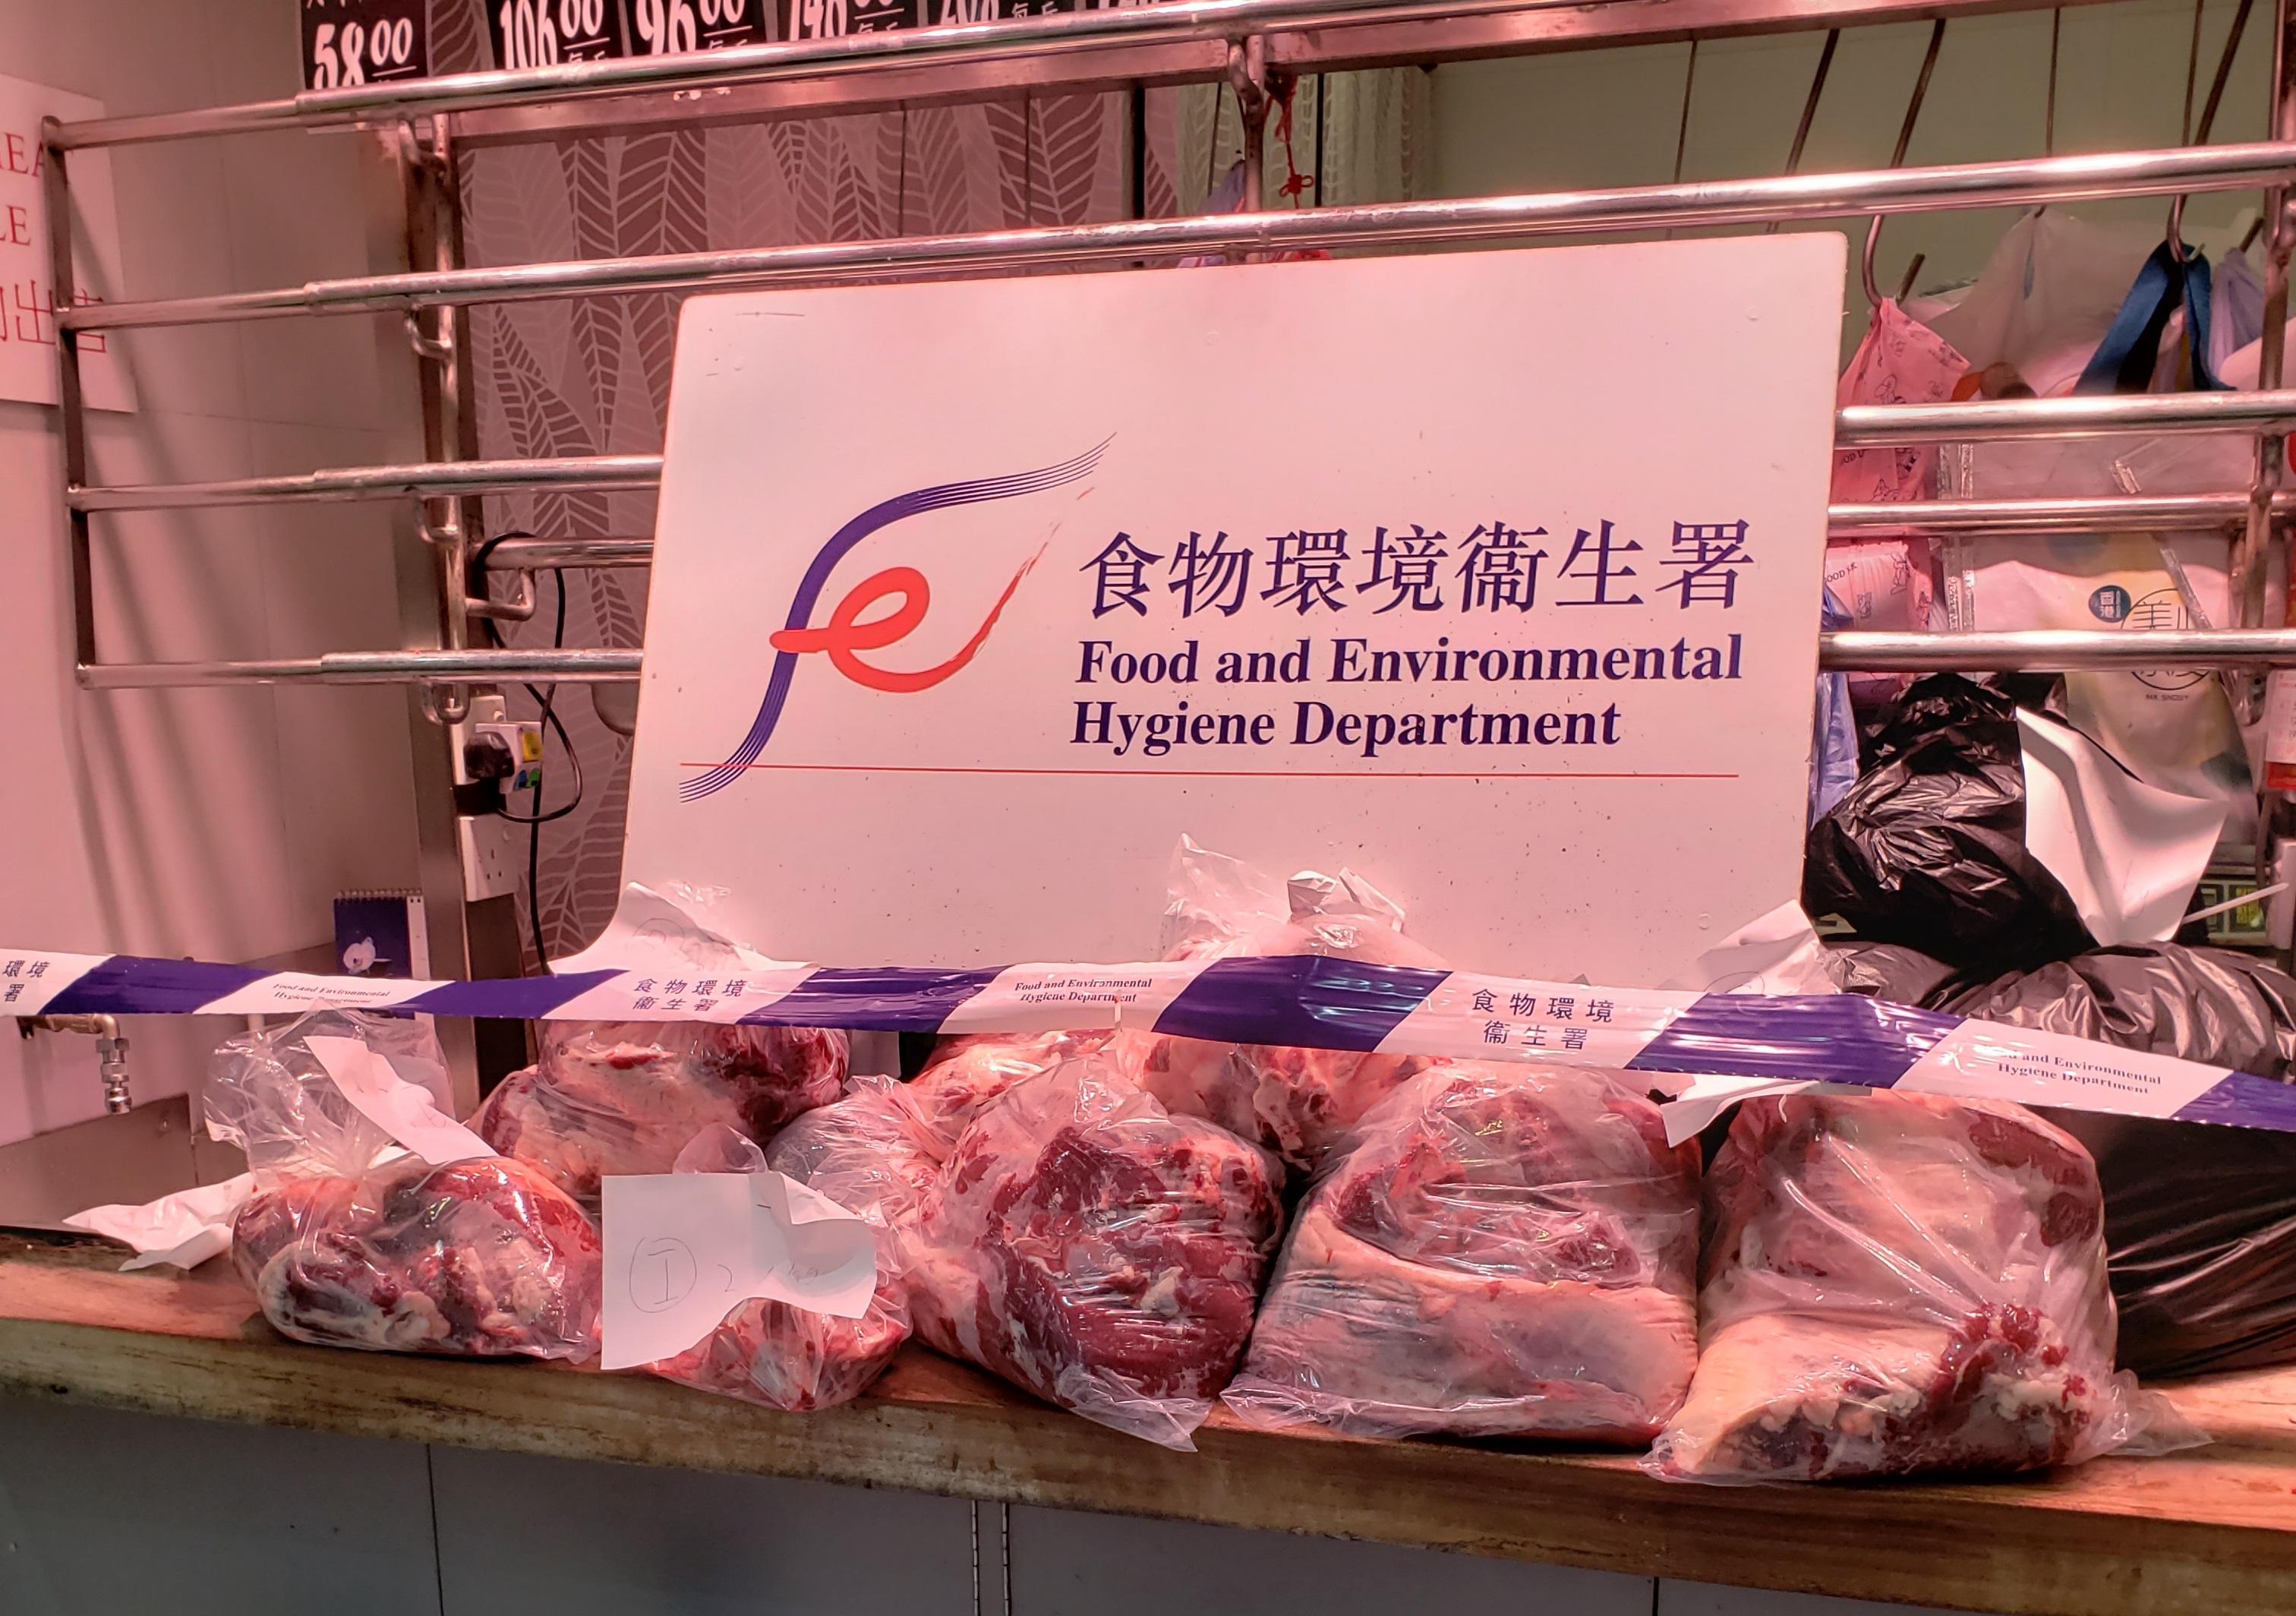 The Food and Environmental Hygiene Department (FEHD) raided a licensed fresh provision shop in Sha Tin District suspected of selling frozen meat as fresh meat today (December 15). Photo shows some of the meat seized by FEHD officers during the operation.